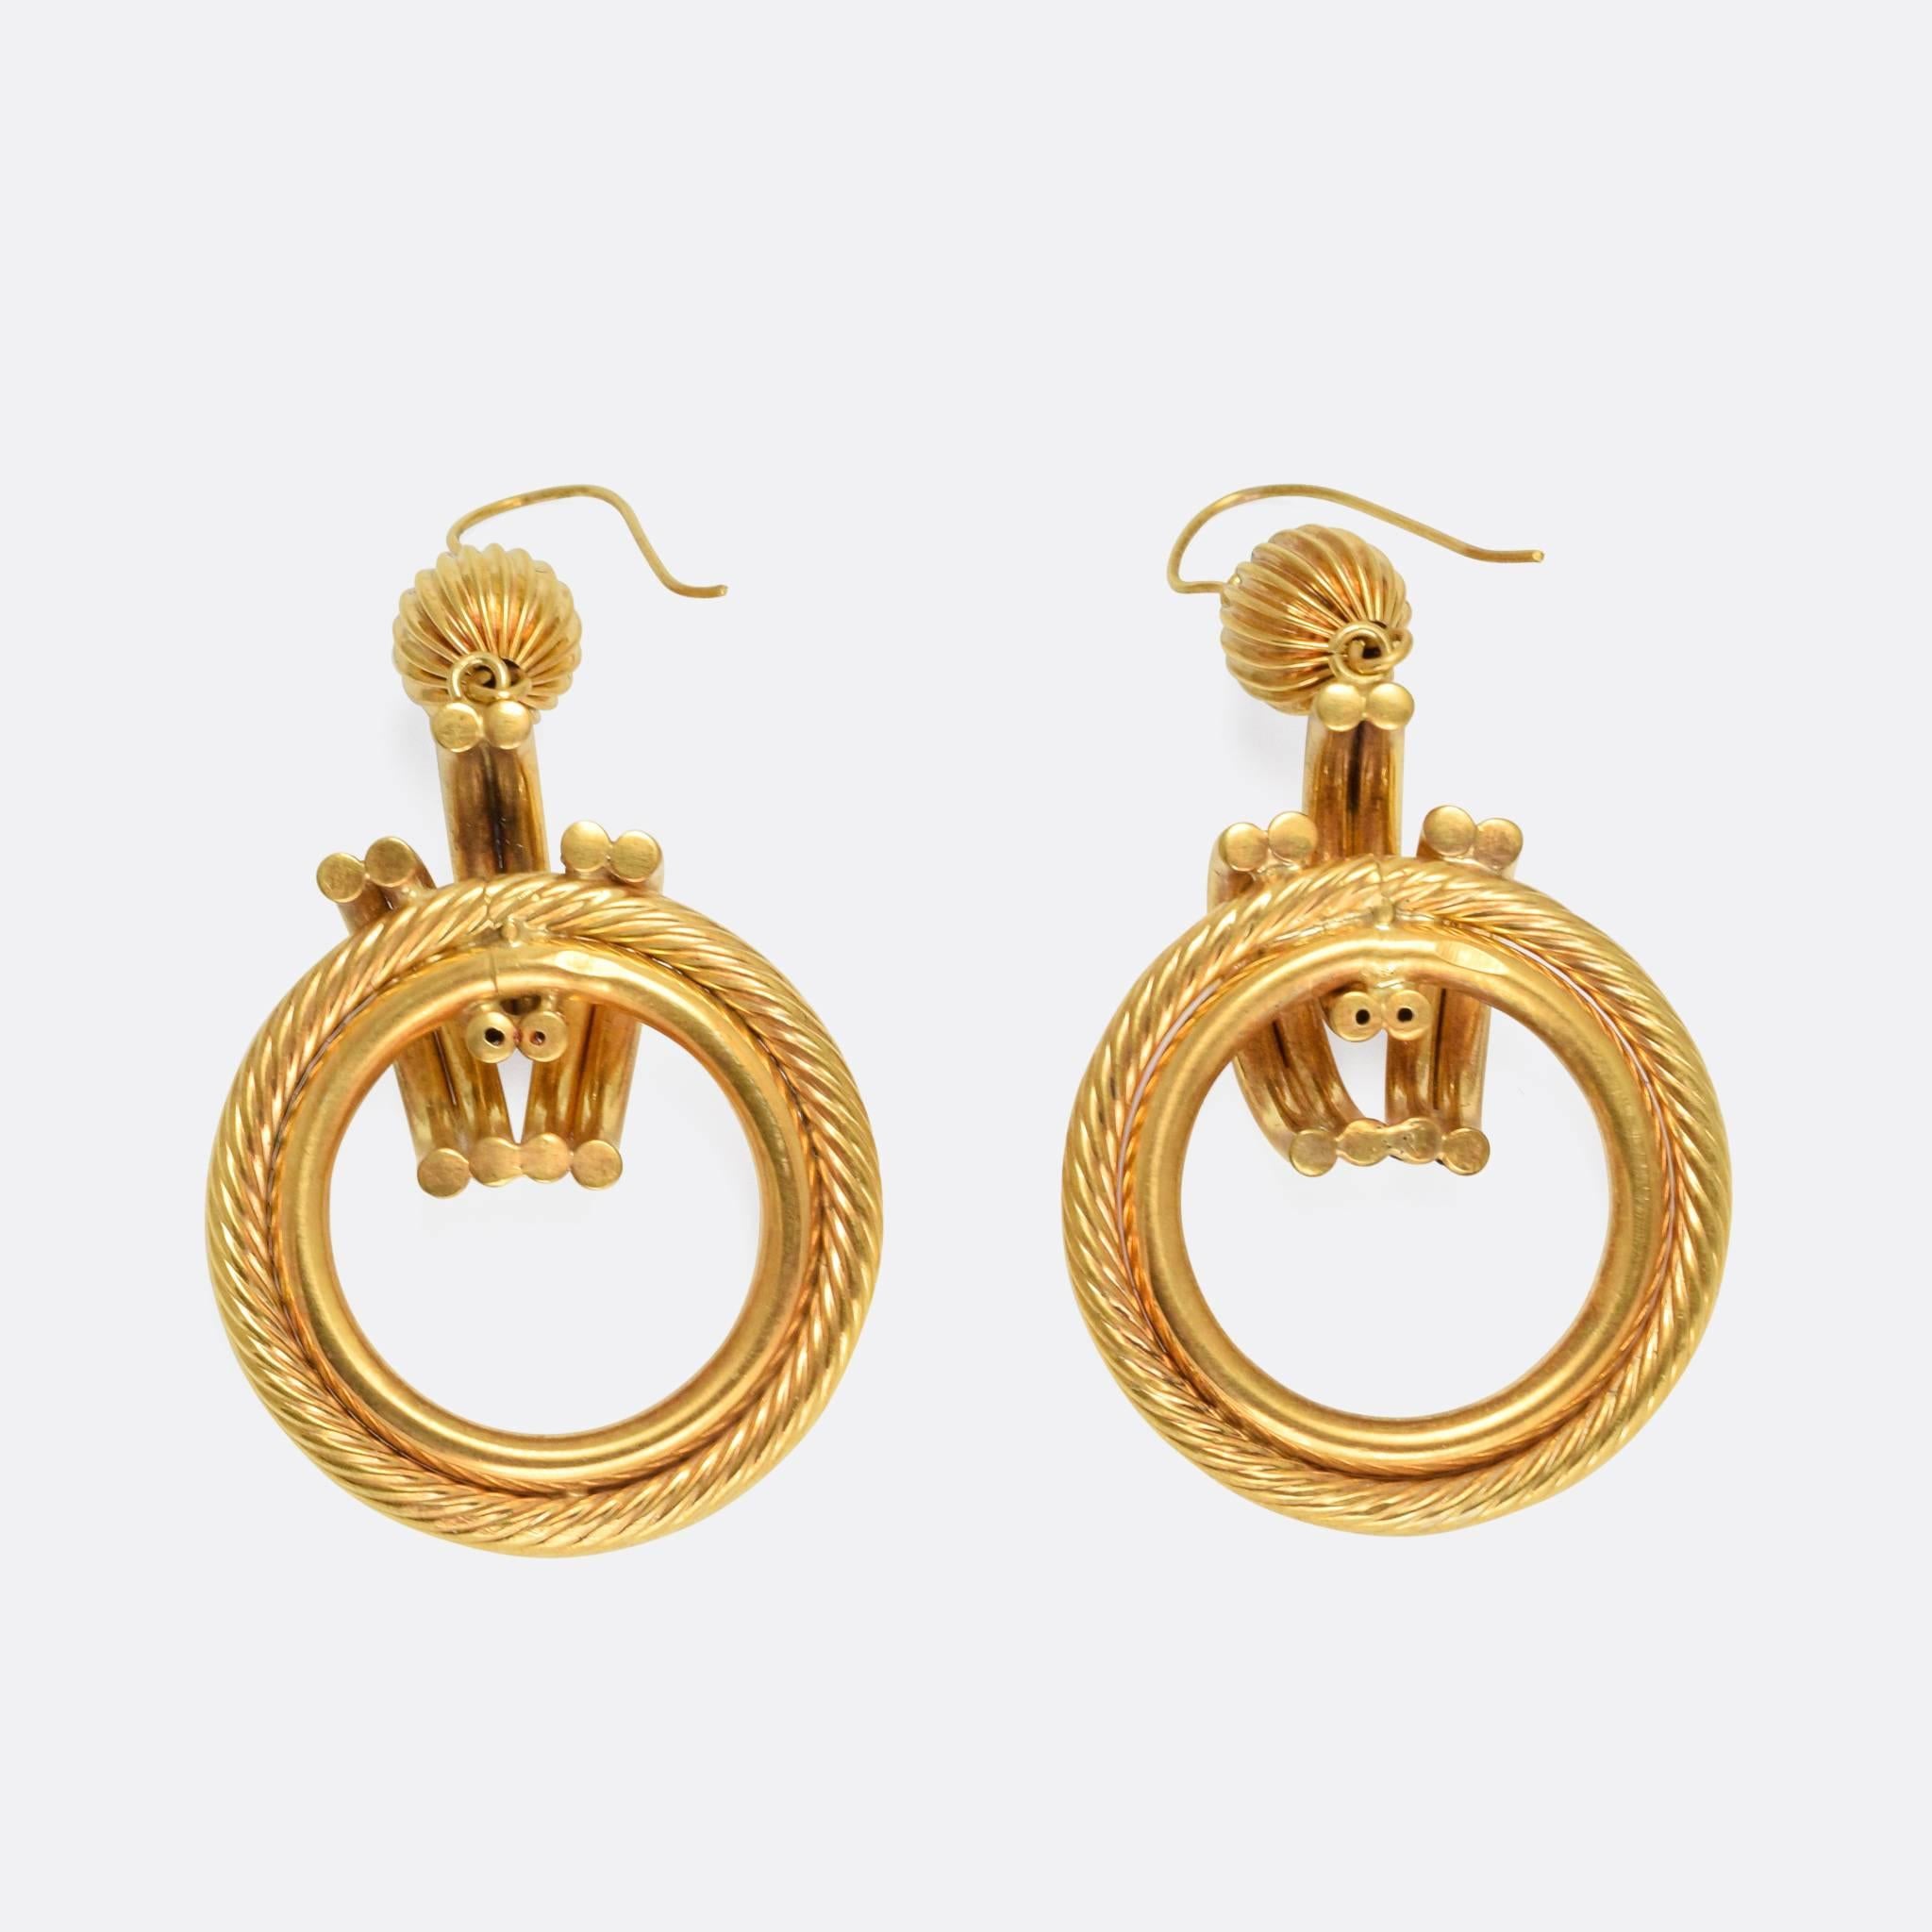 A pair of vintage, larger scale gold earrings modelled in yellow gold throughout. They date to the 1970s, still looking fabulous today.

MEASUREMENTS
Drop: 6.2cm
Width: 3.2cm

WEIGHT
10.8g

MARKS
No marks present, tests as 9k gold